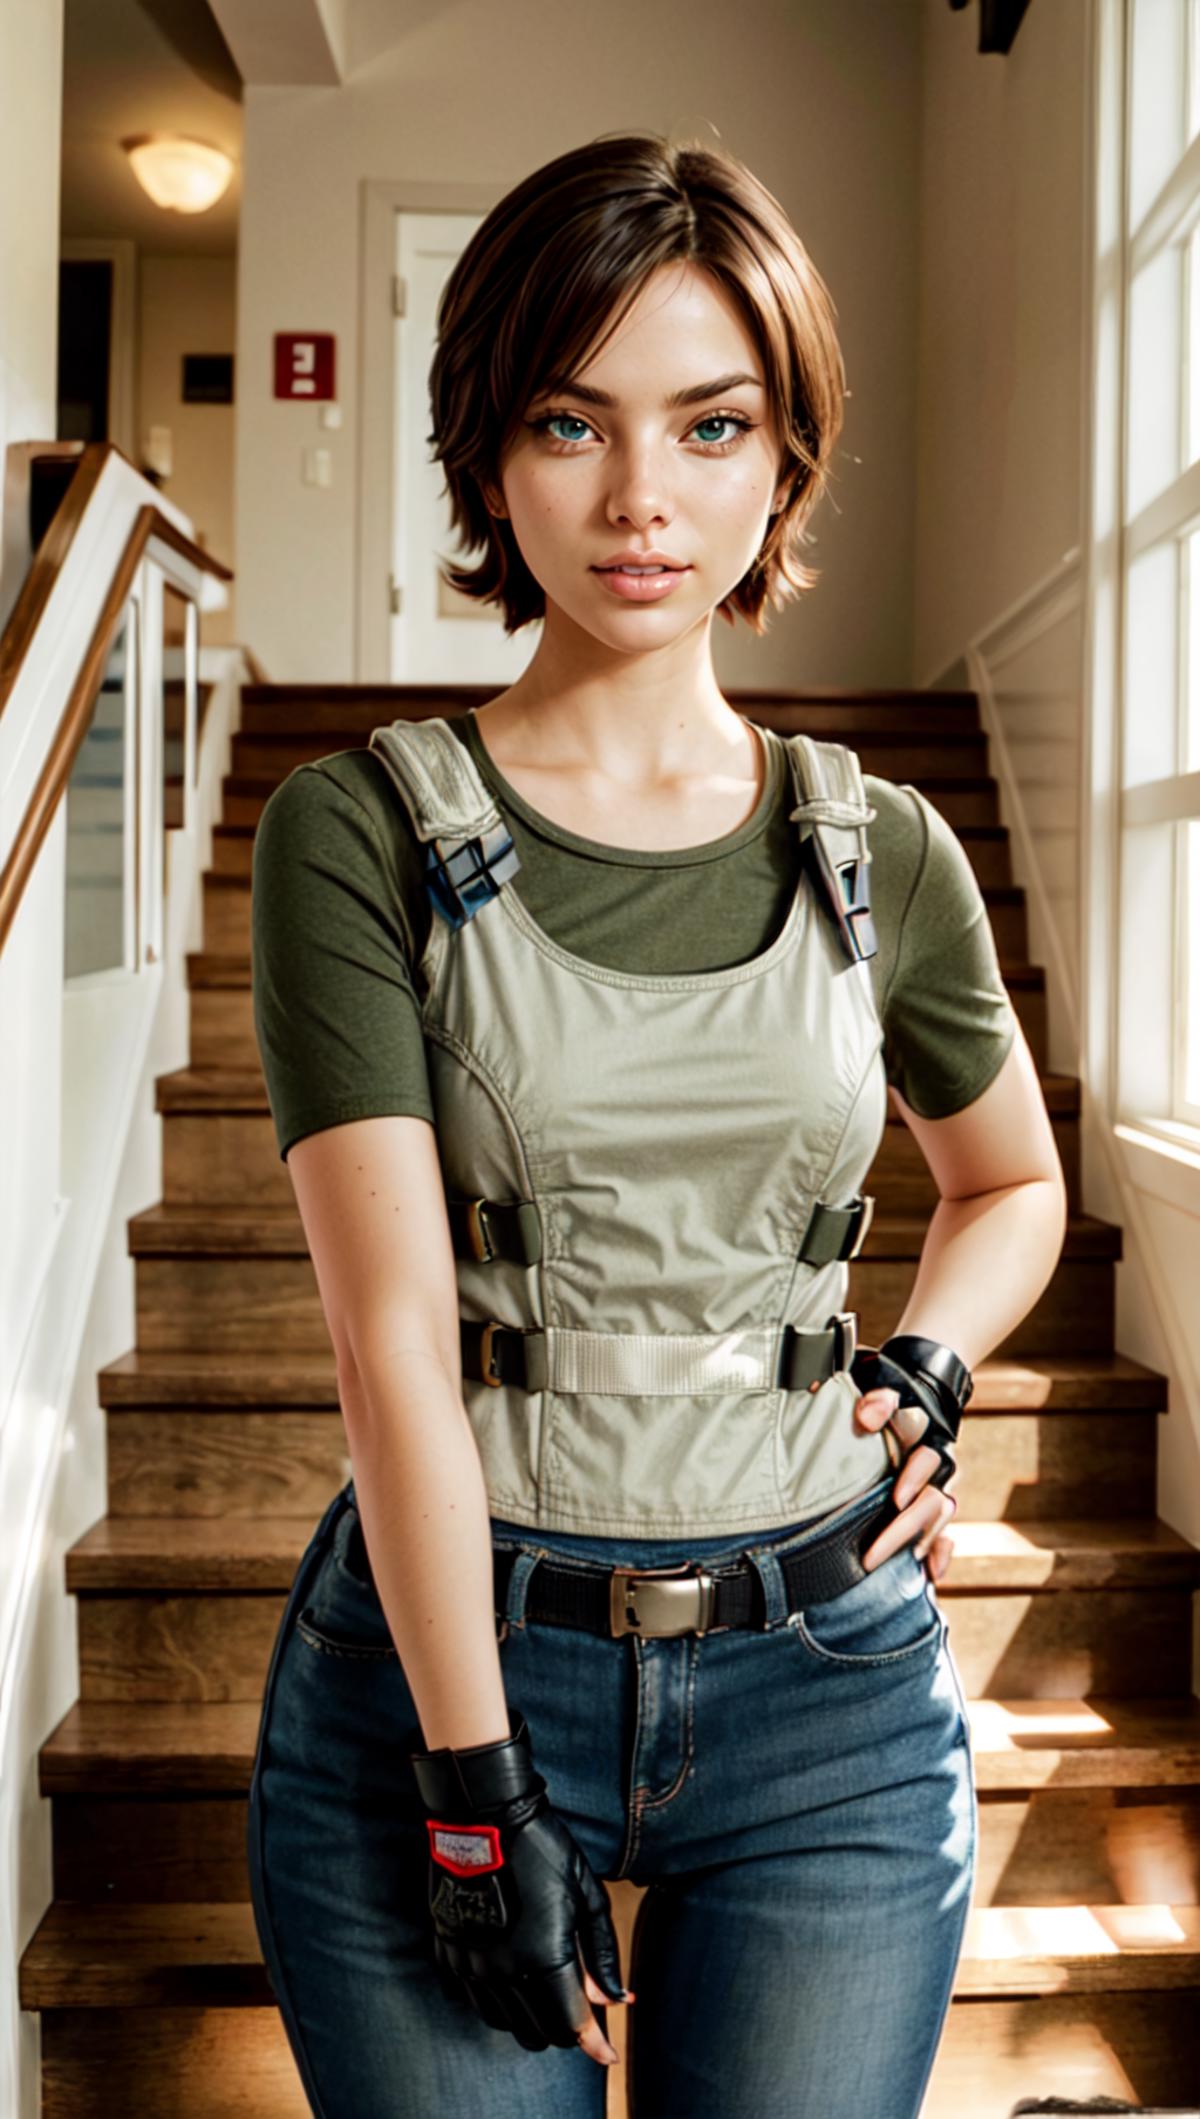 A young woman wearing a green shirt and vest is posing for the camera.